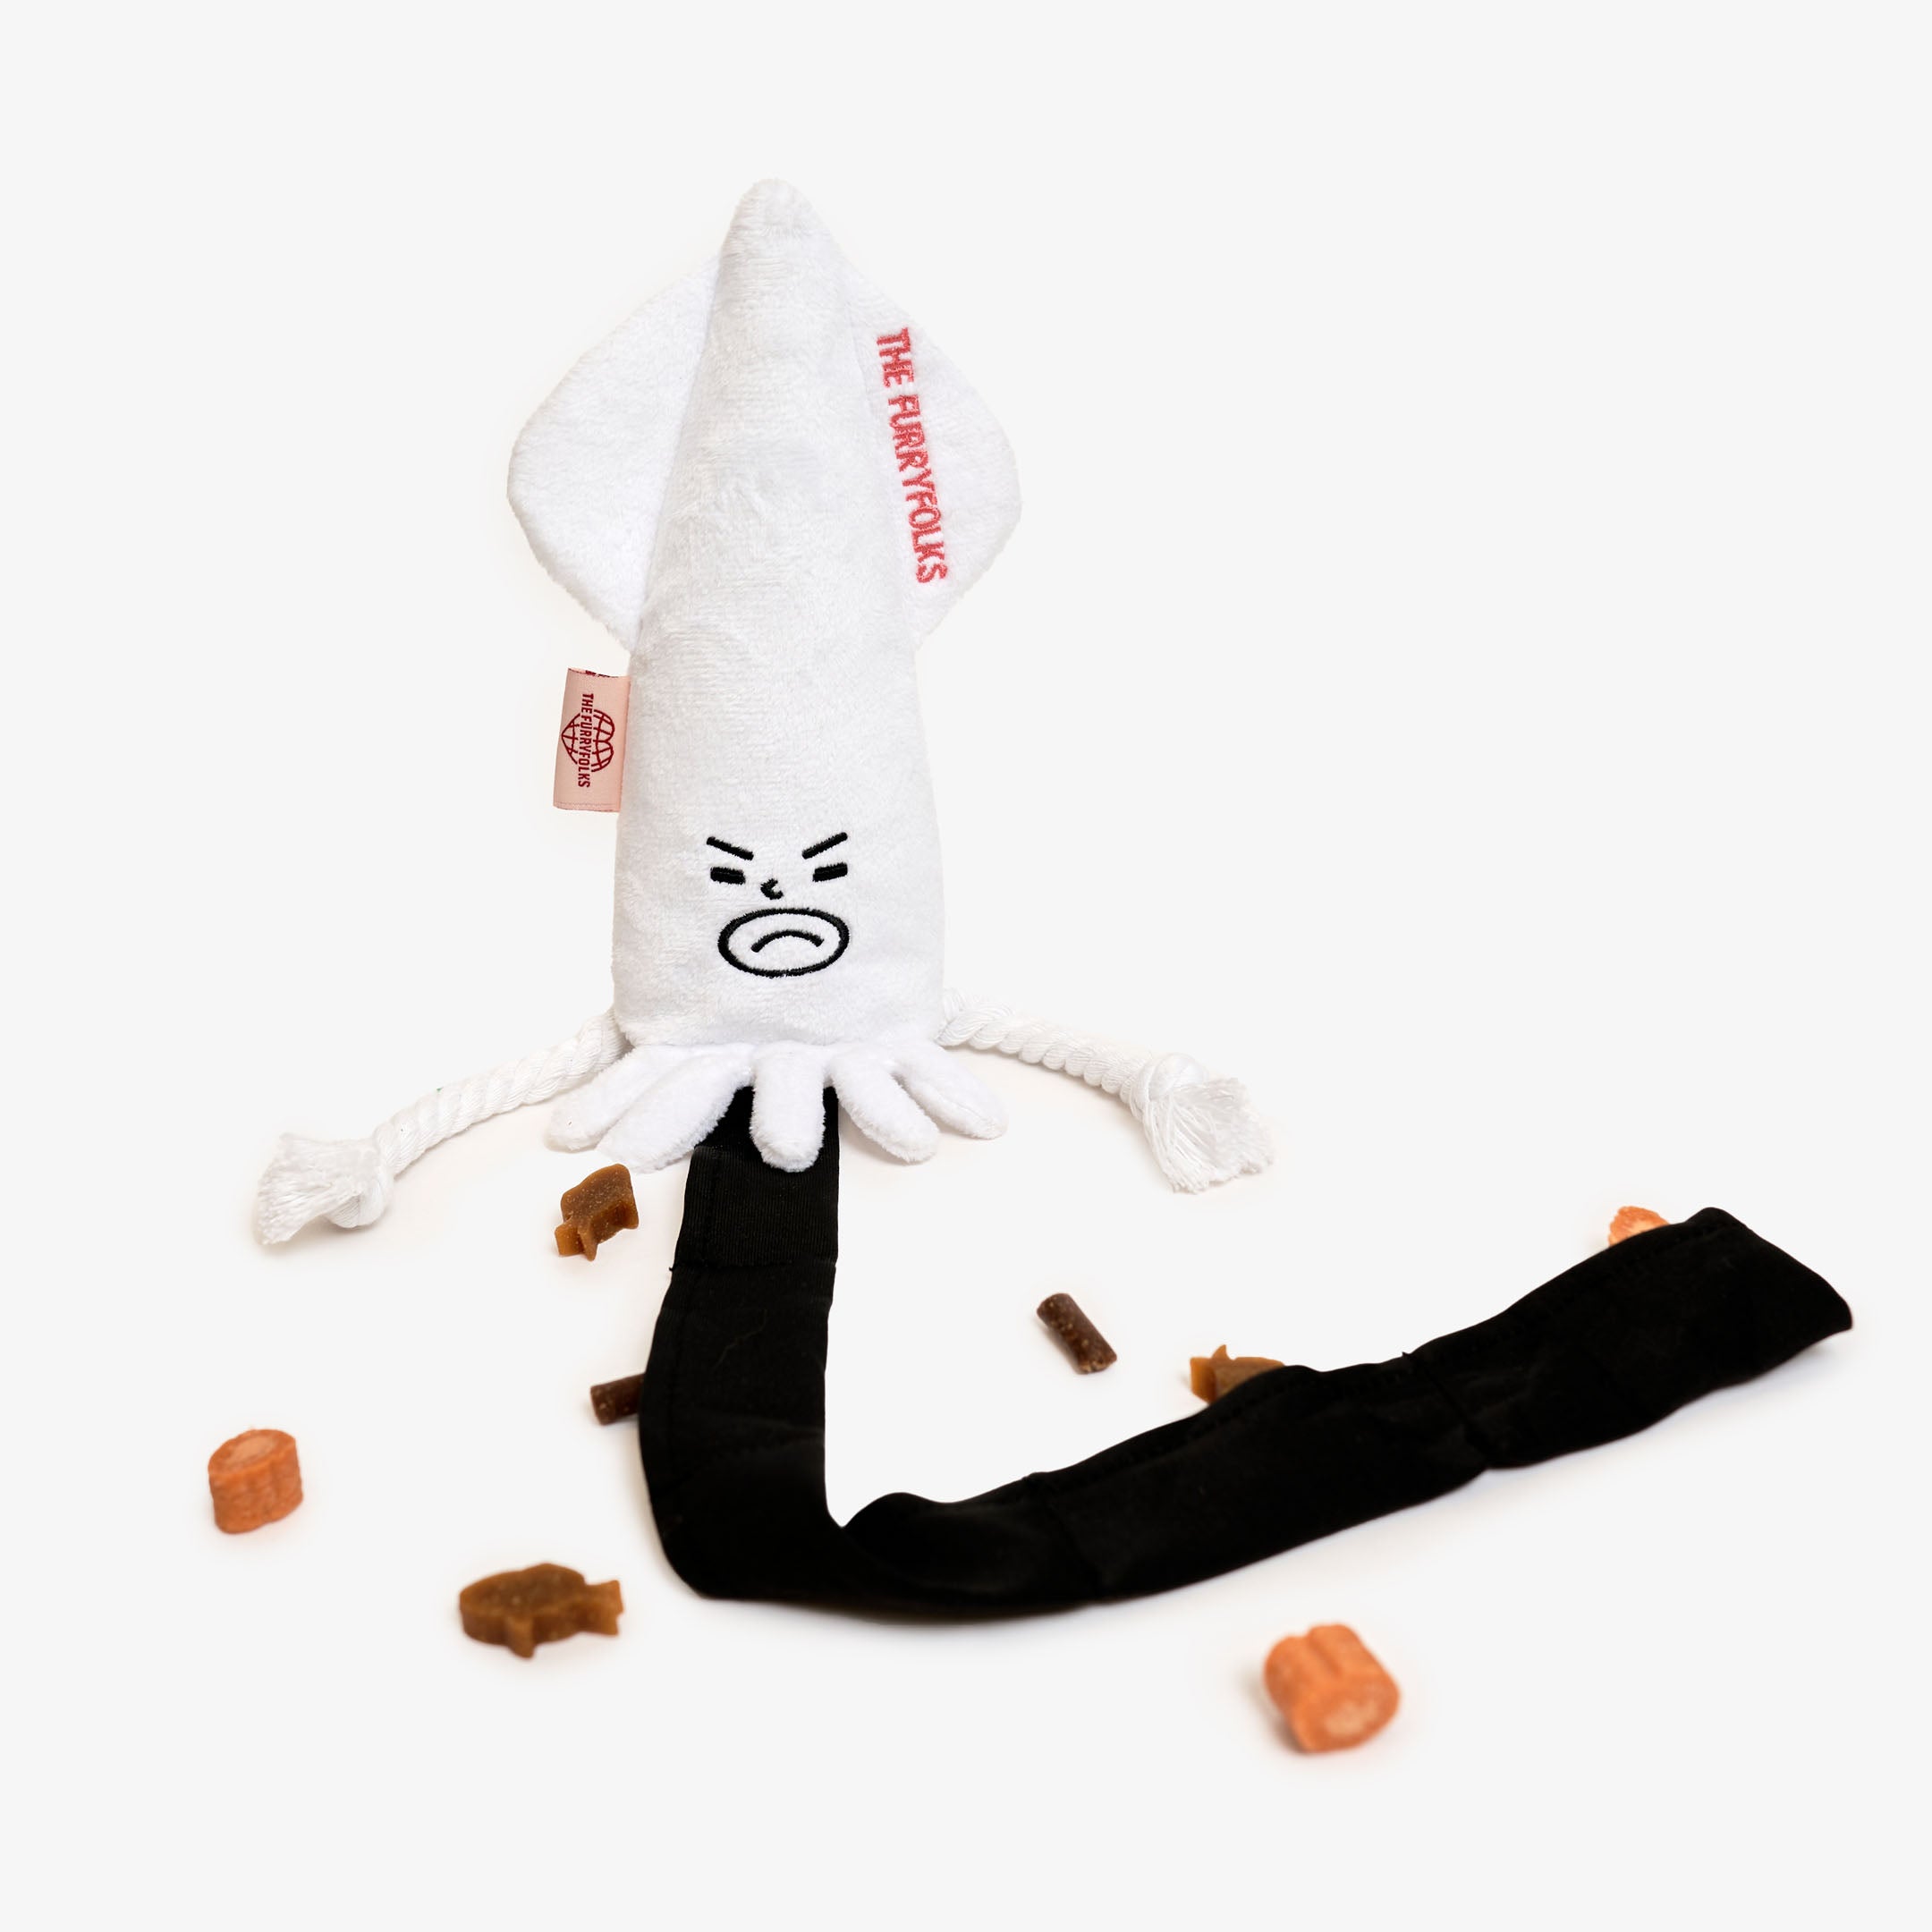 White squid plush dog toy with 'The Furryfolks' branding surrounded by treats.